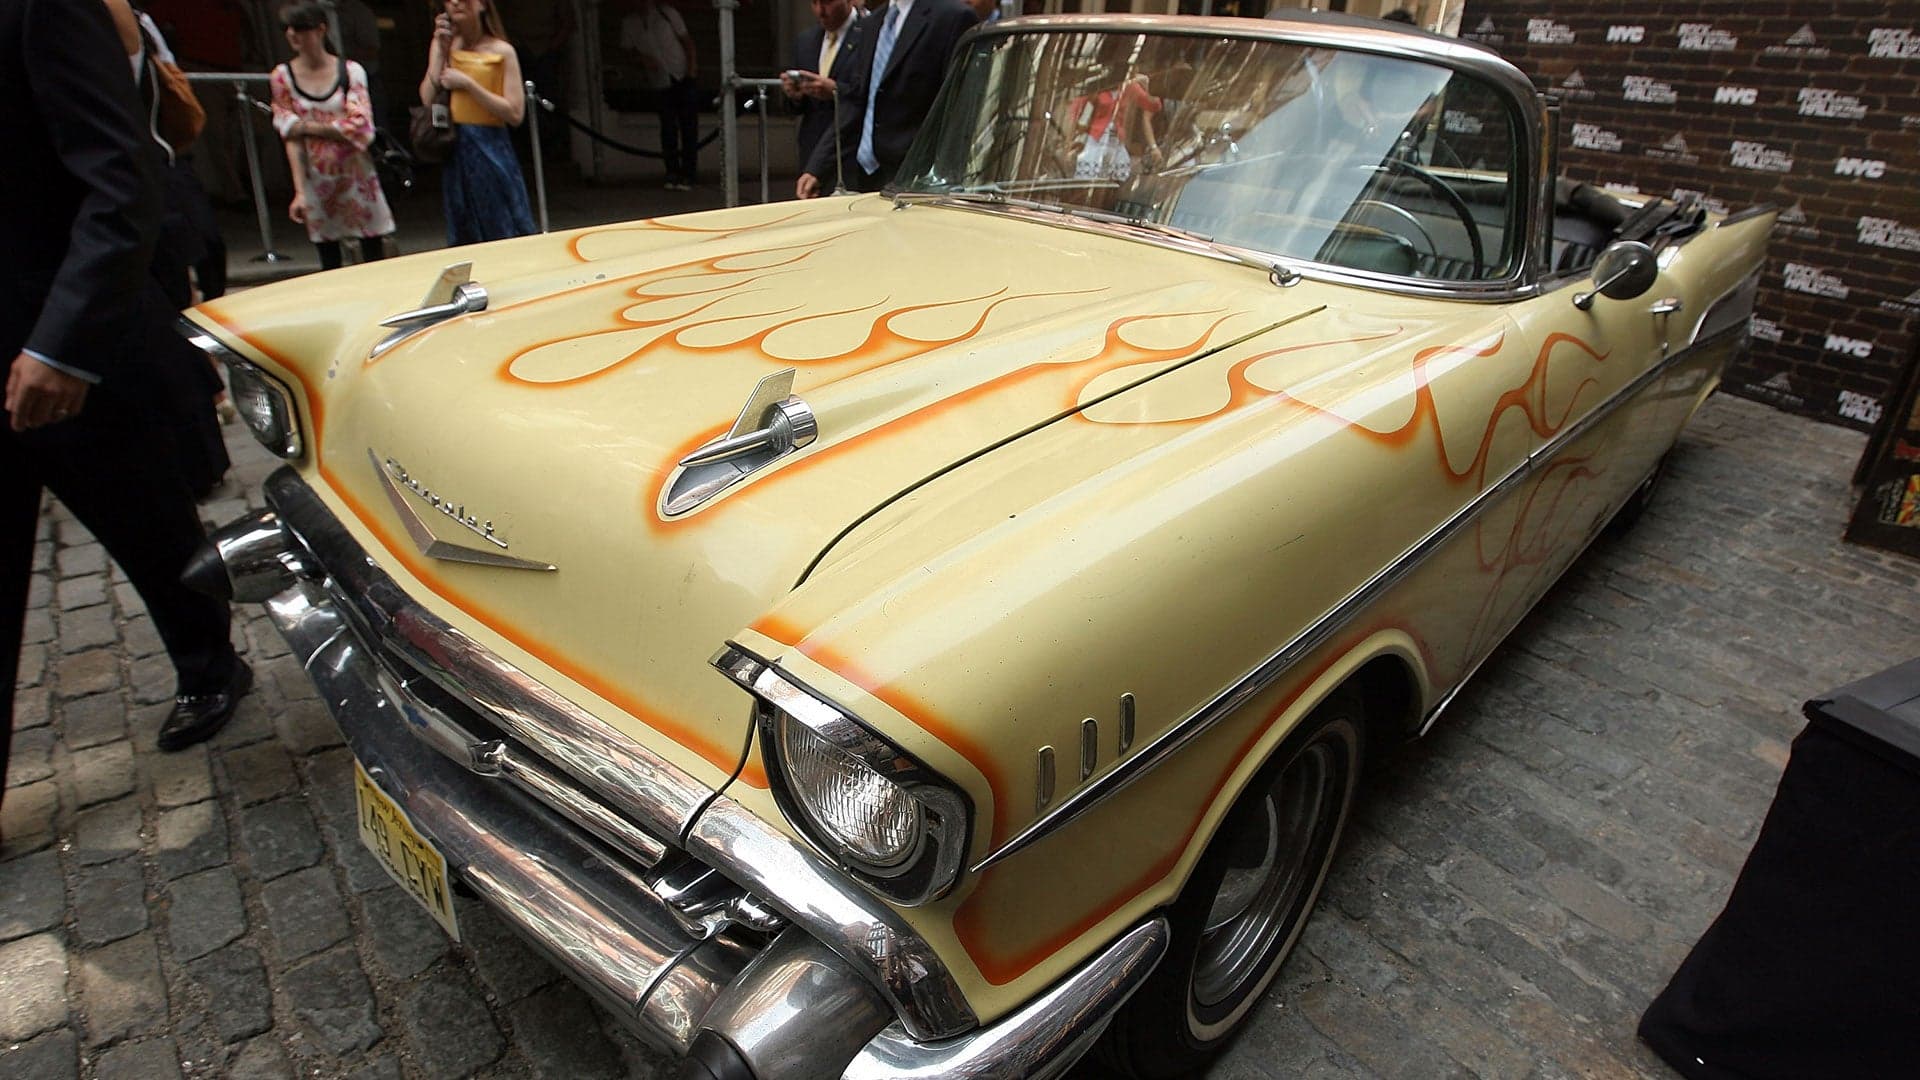 Bruce Springsteen’s ‘57 Chevy Bel Air Is on eBay Right Now